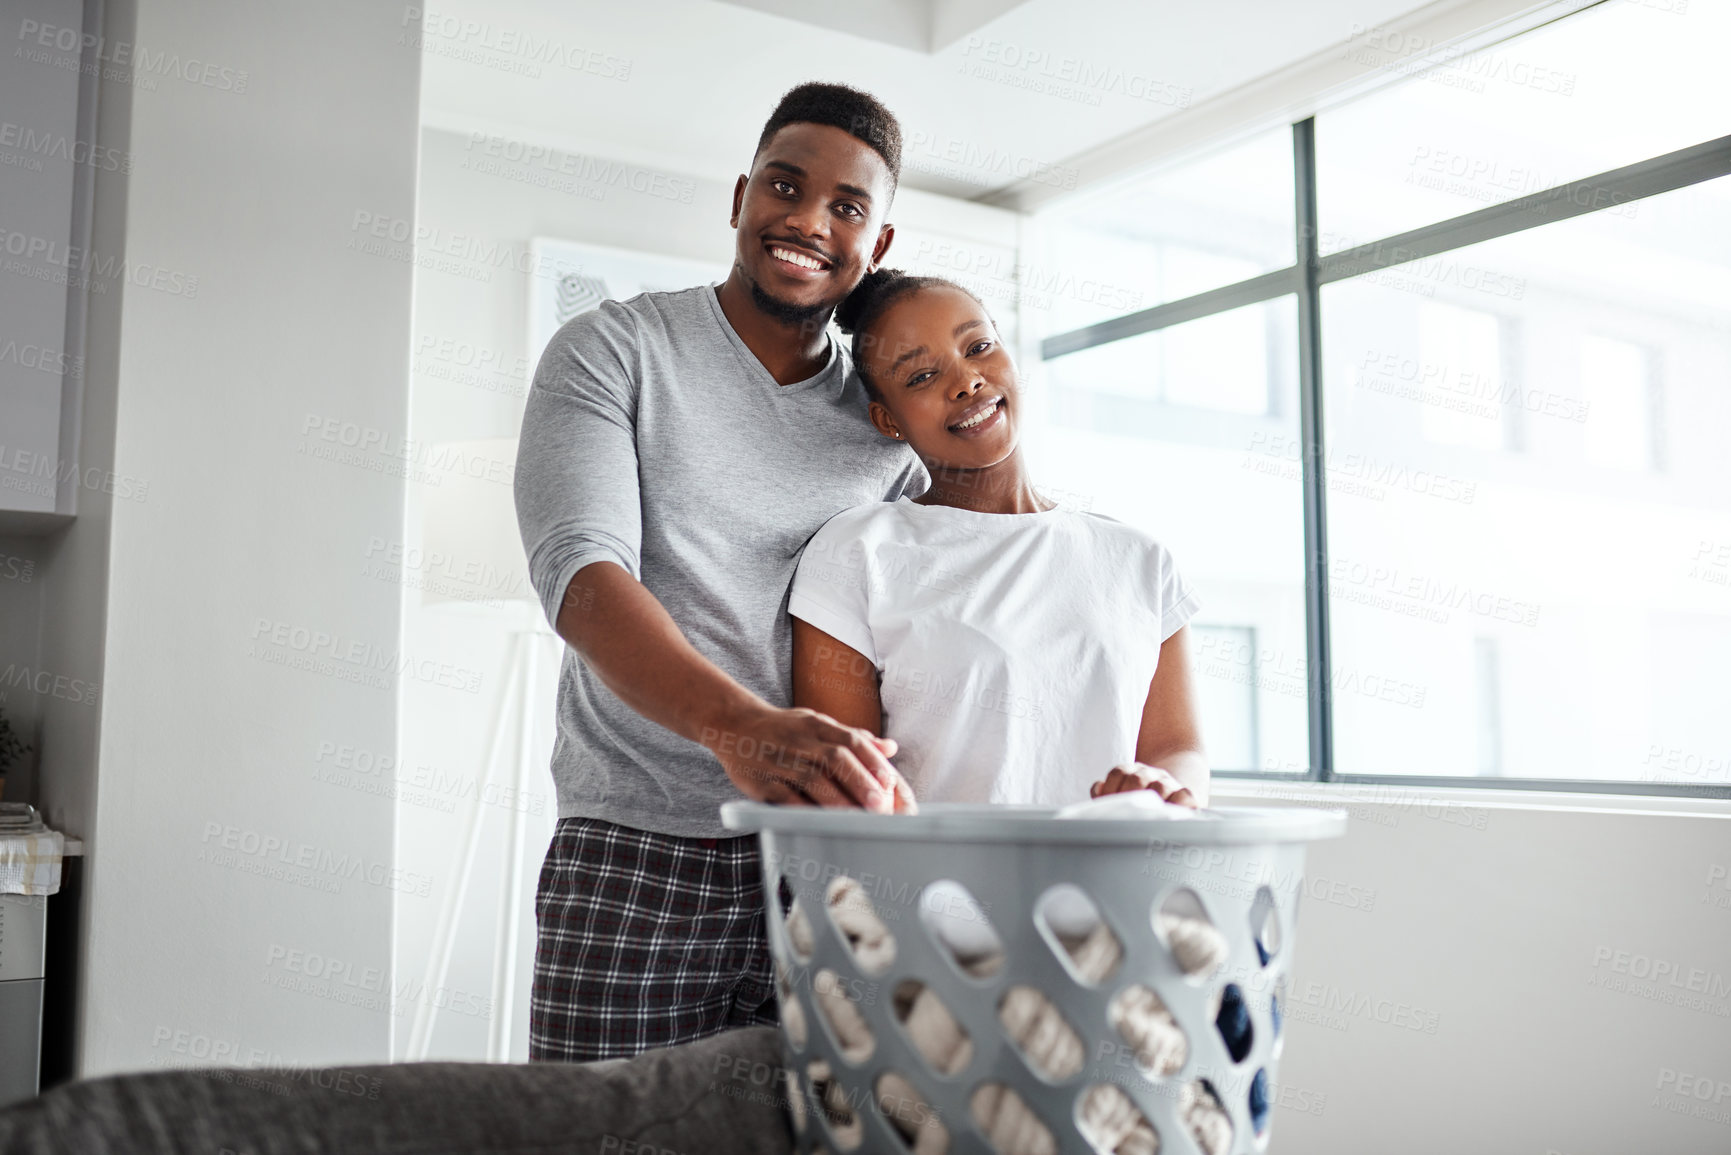 Buy stock photo Shot of a happy young couple doing laundry together at home